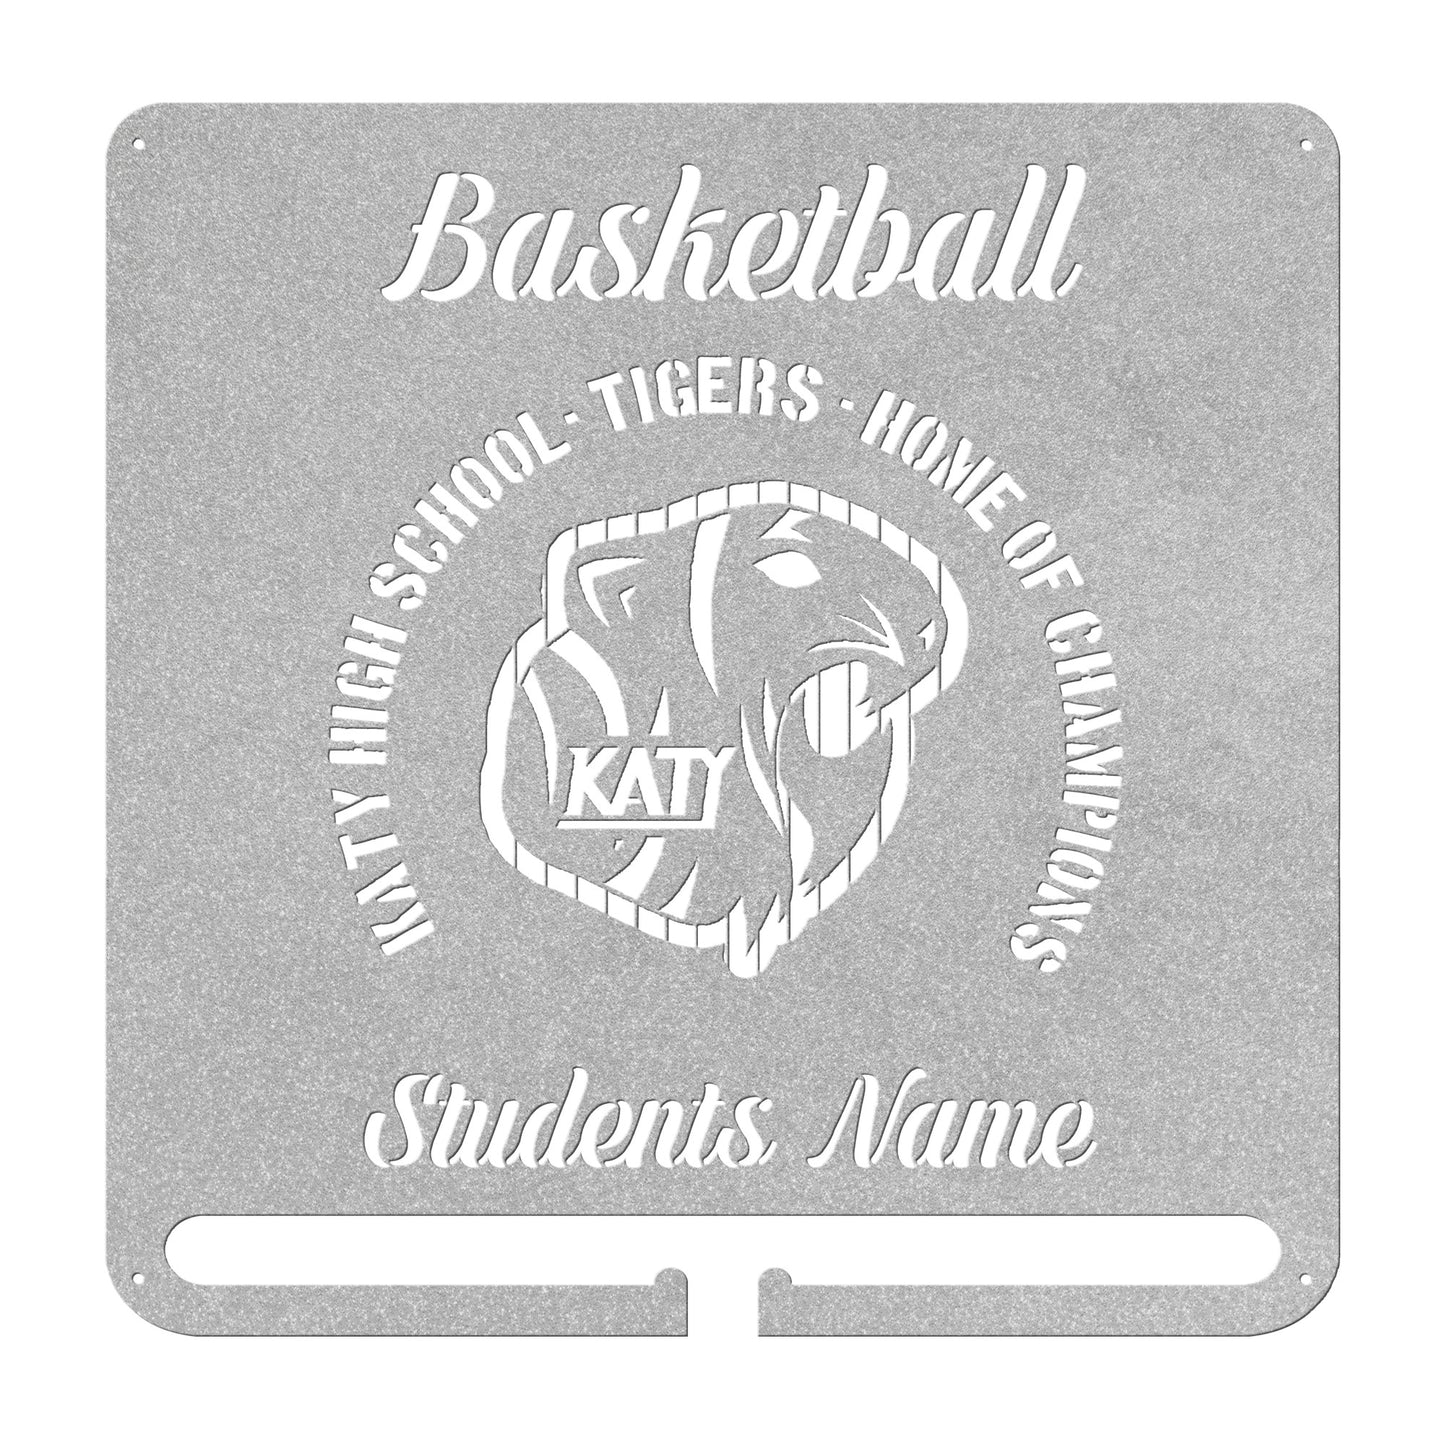 KHS - Basketball Recognition/Display Sign, Circle Script